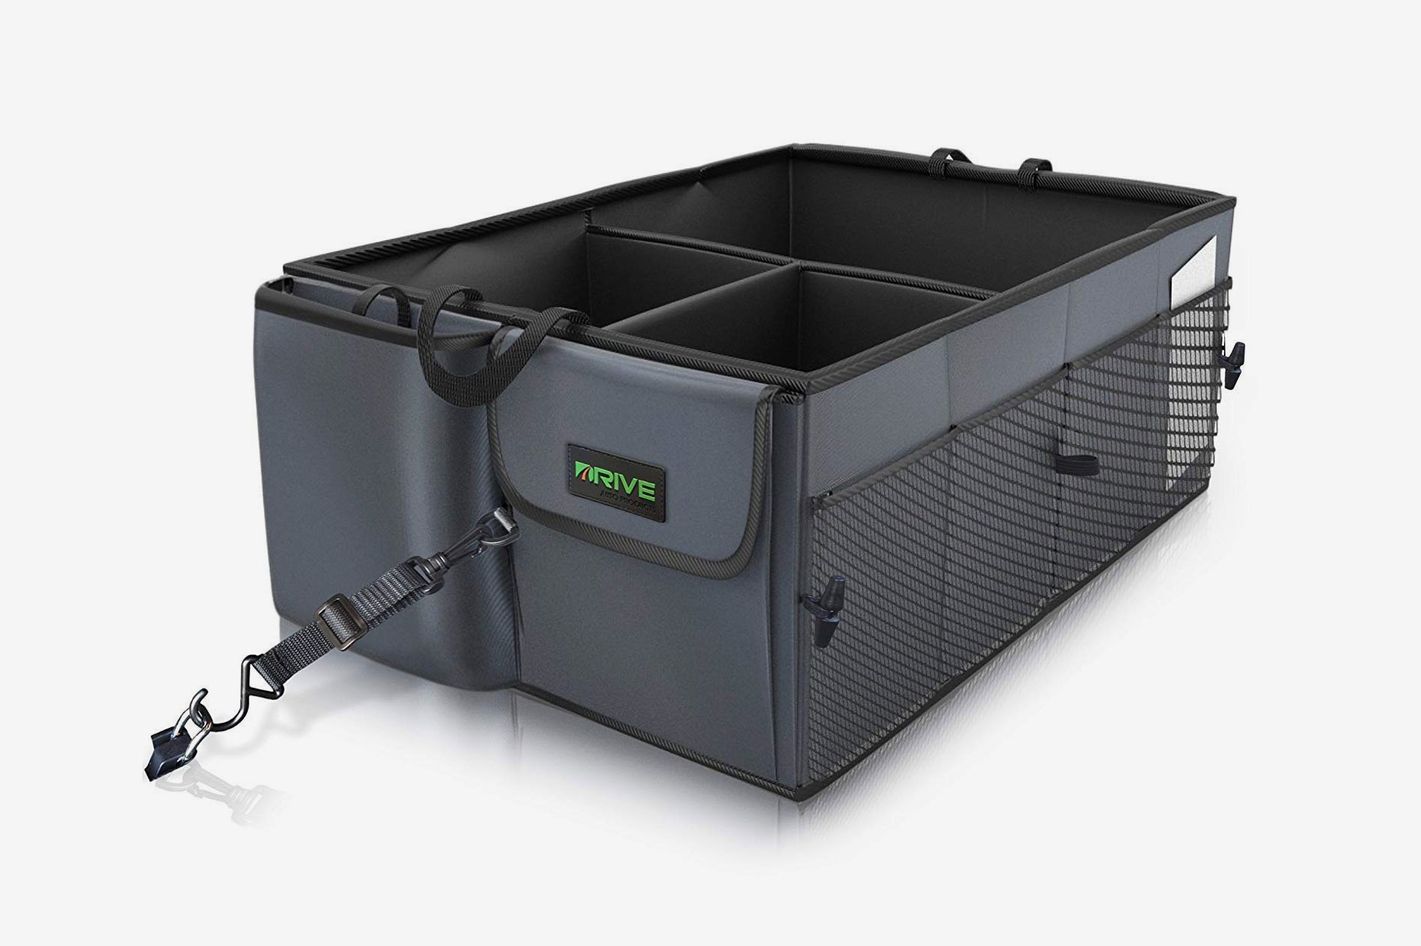 The 10 Best Trunk Organizers of 2024